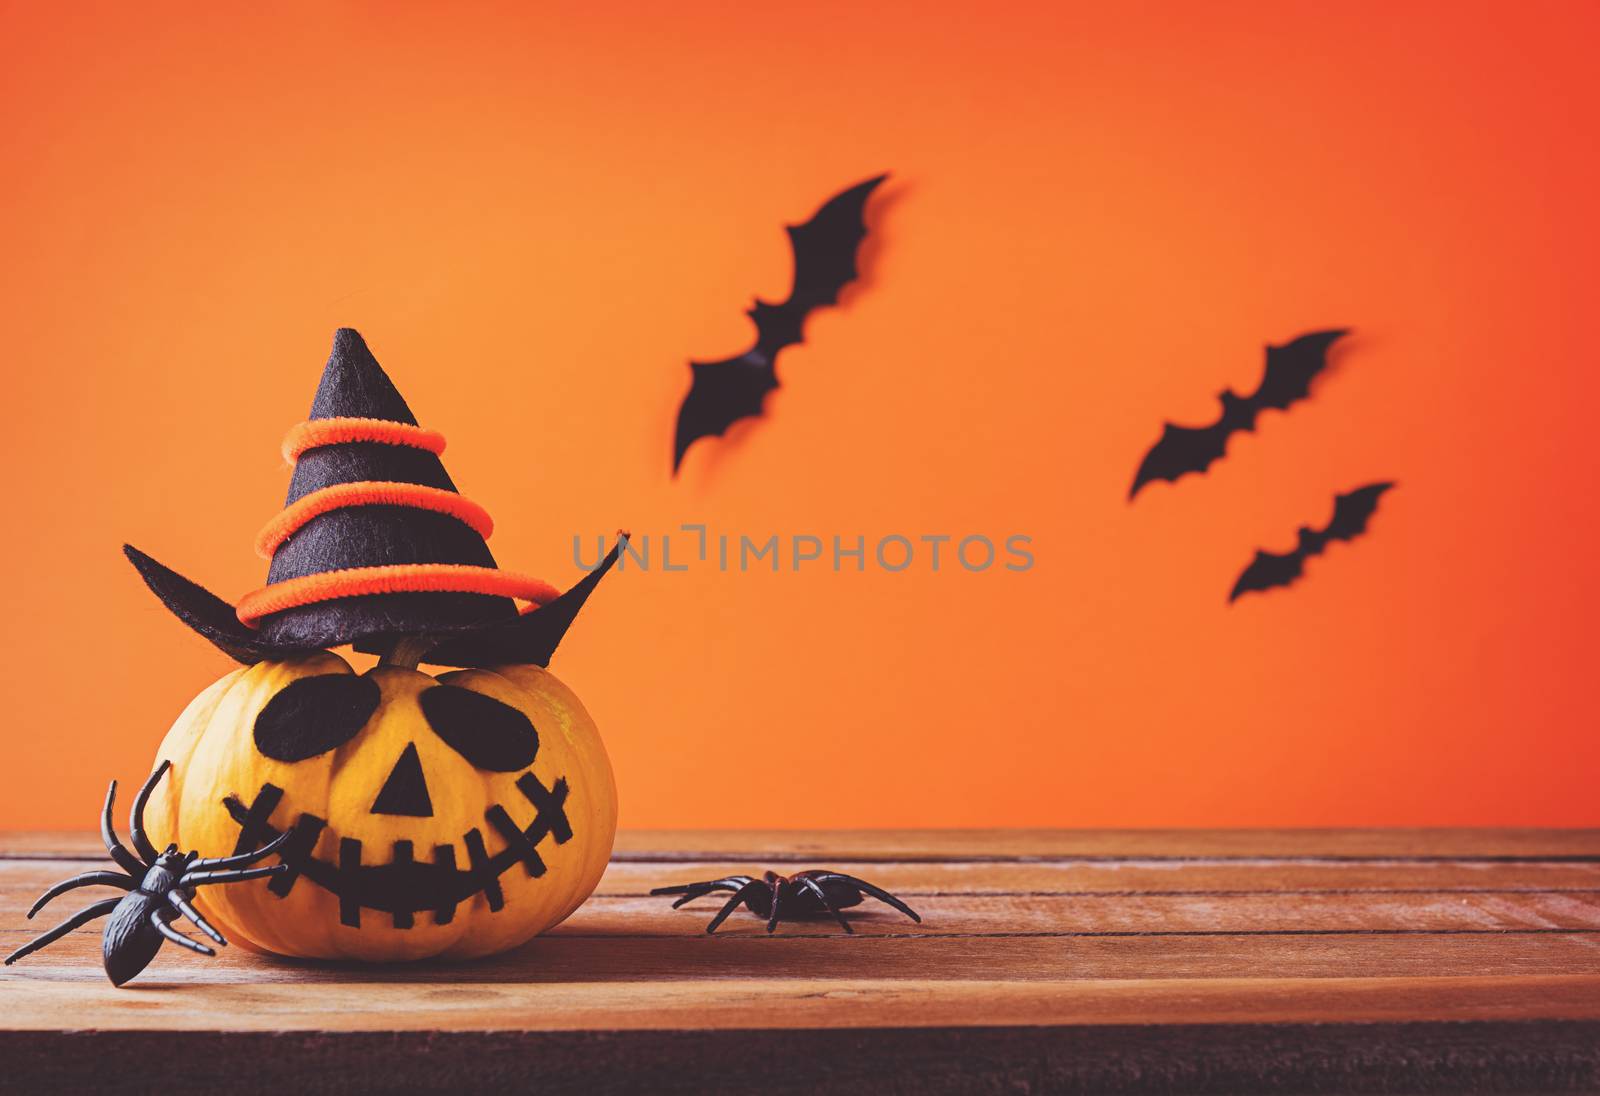 Funny Halloween day decoration party, Cute pumpkin ghost spooky jack o lantern face wear hat, black spider and bats on wooden table, studio shot isolated on an orange background, Happy holiday concept